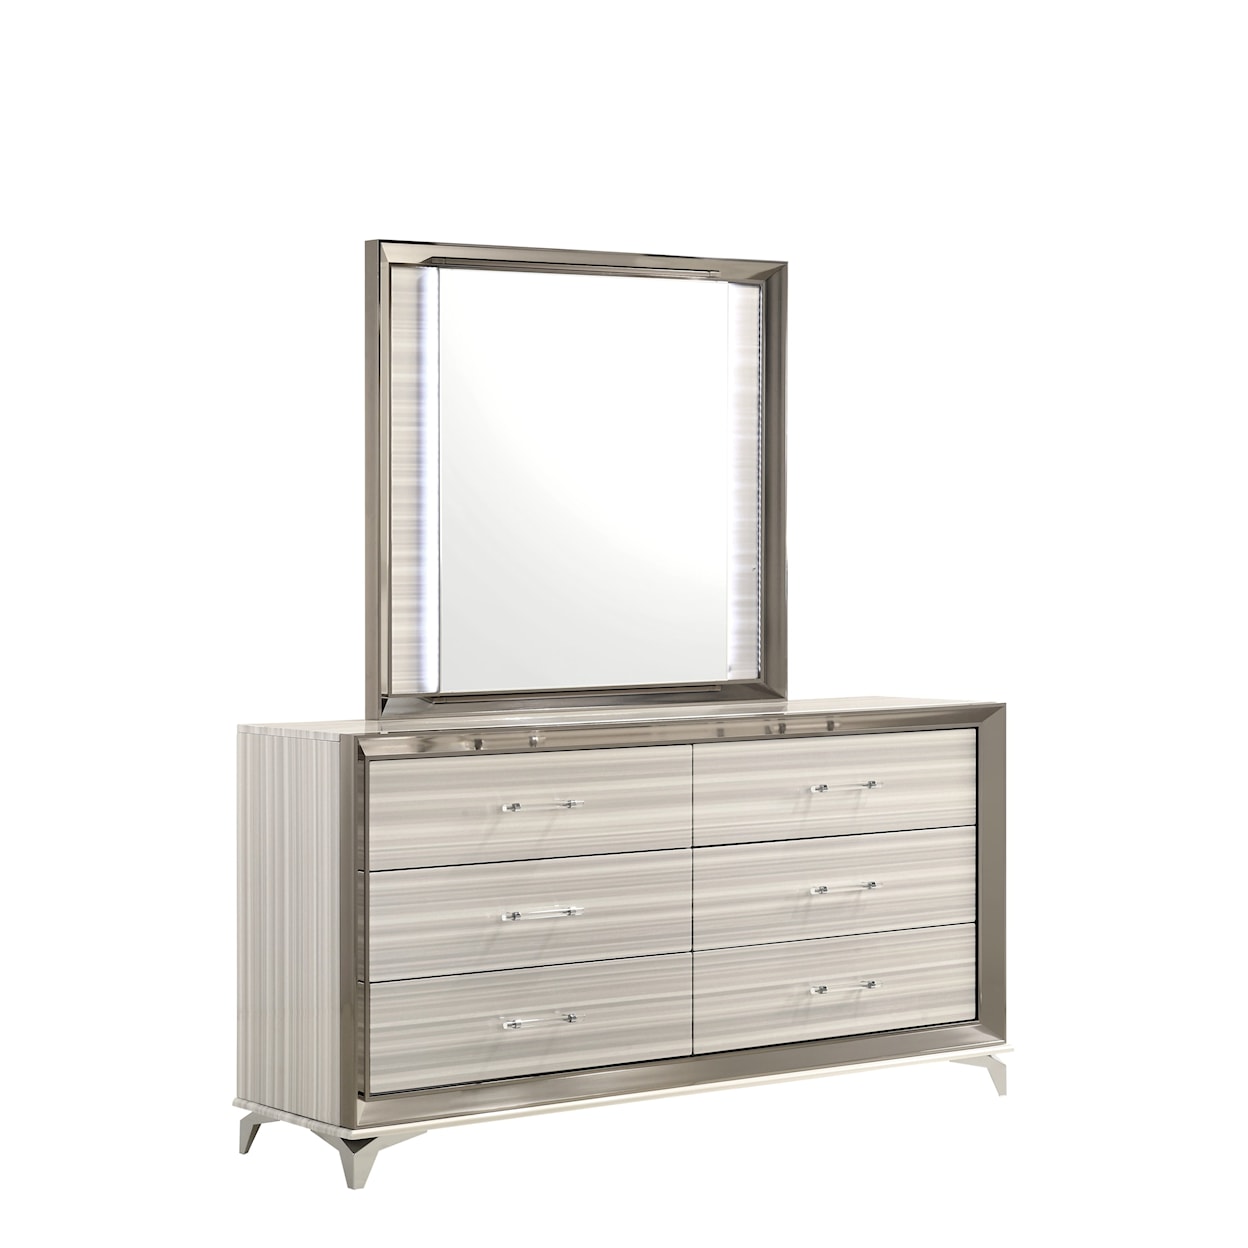 Global Furniture Zambrano White 6-Drawer Dresser with Metal Accents